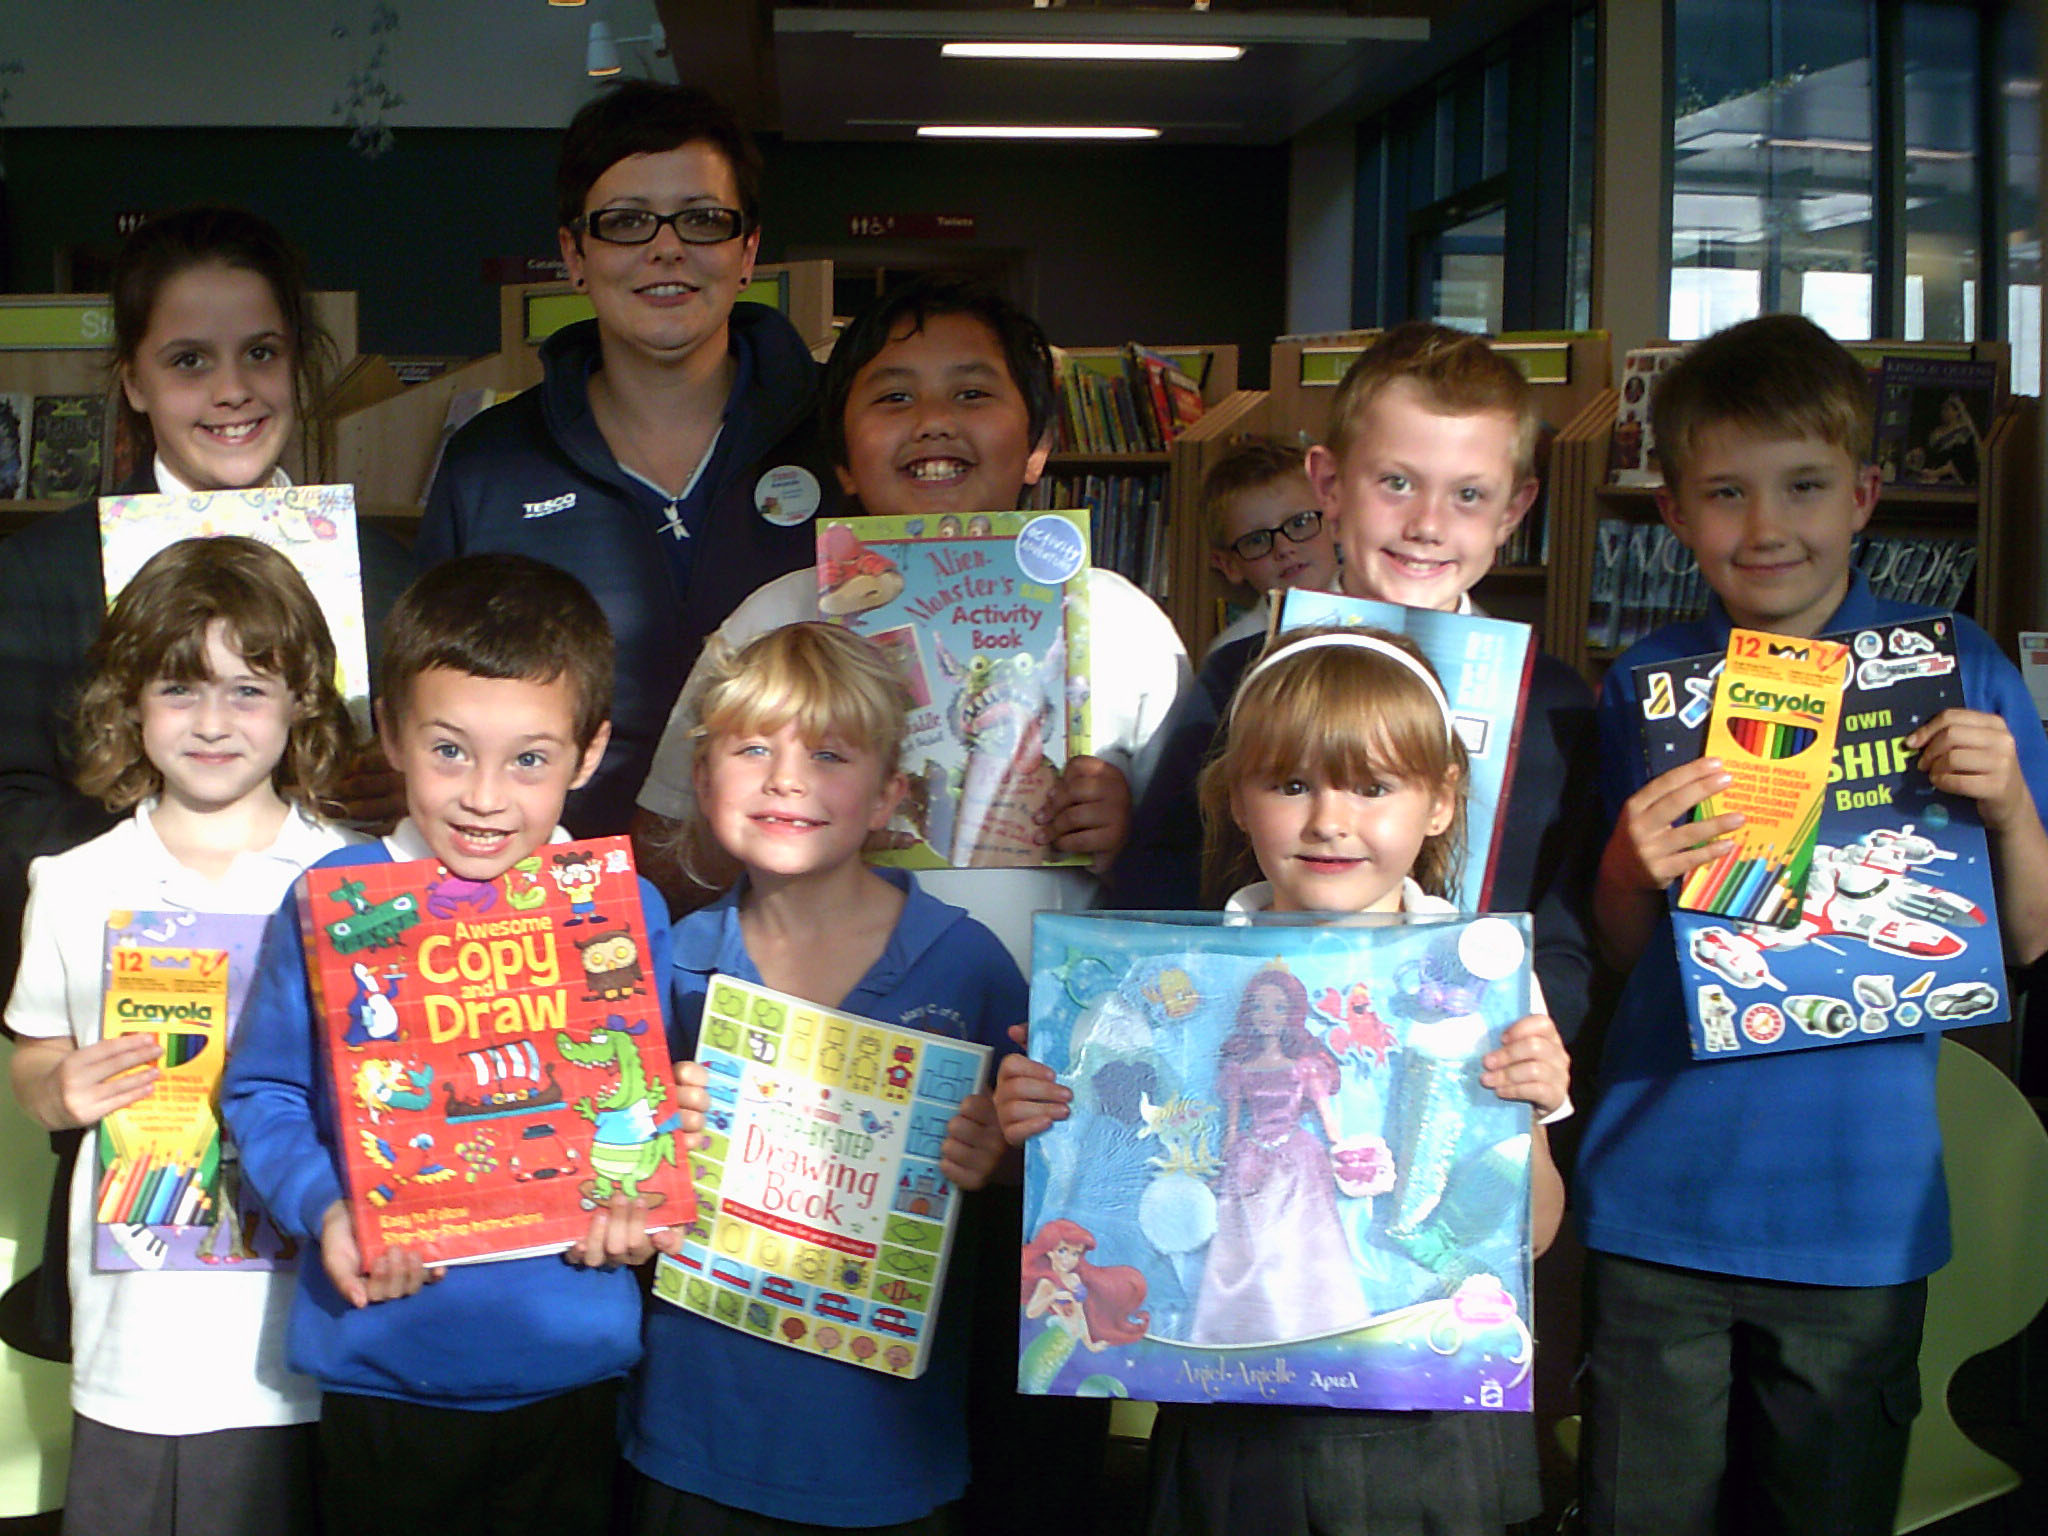 Some of the winners of the colouring competition: The back row from the left - Alexandra Archer (1st prize older category), Community Champion for Tesco Paignton Metro Amanda Nelhams, James Carlo Mund